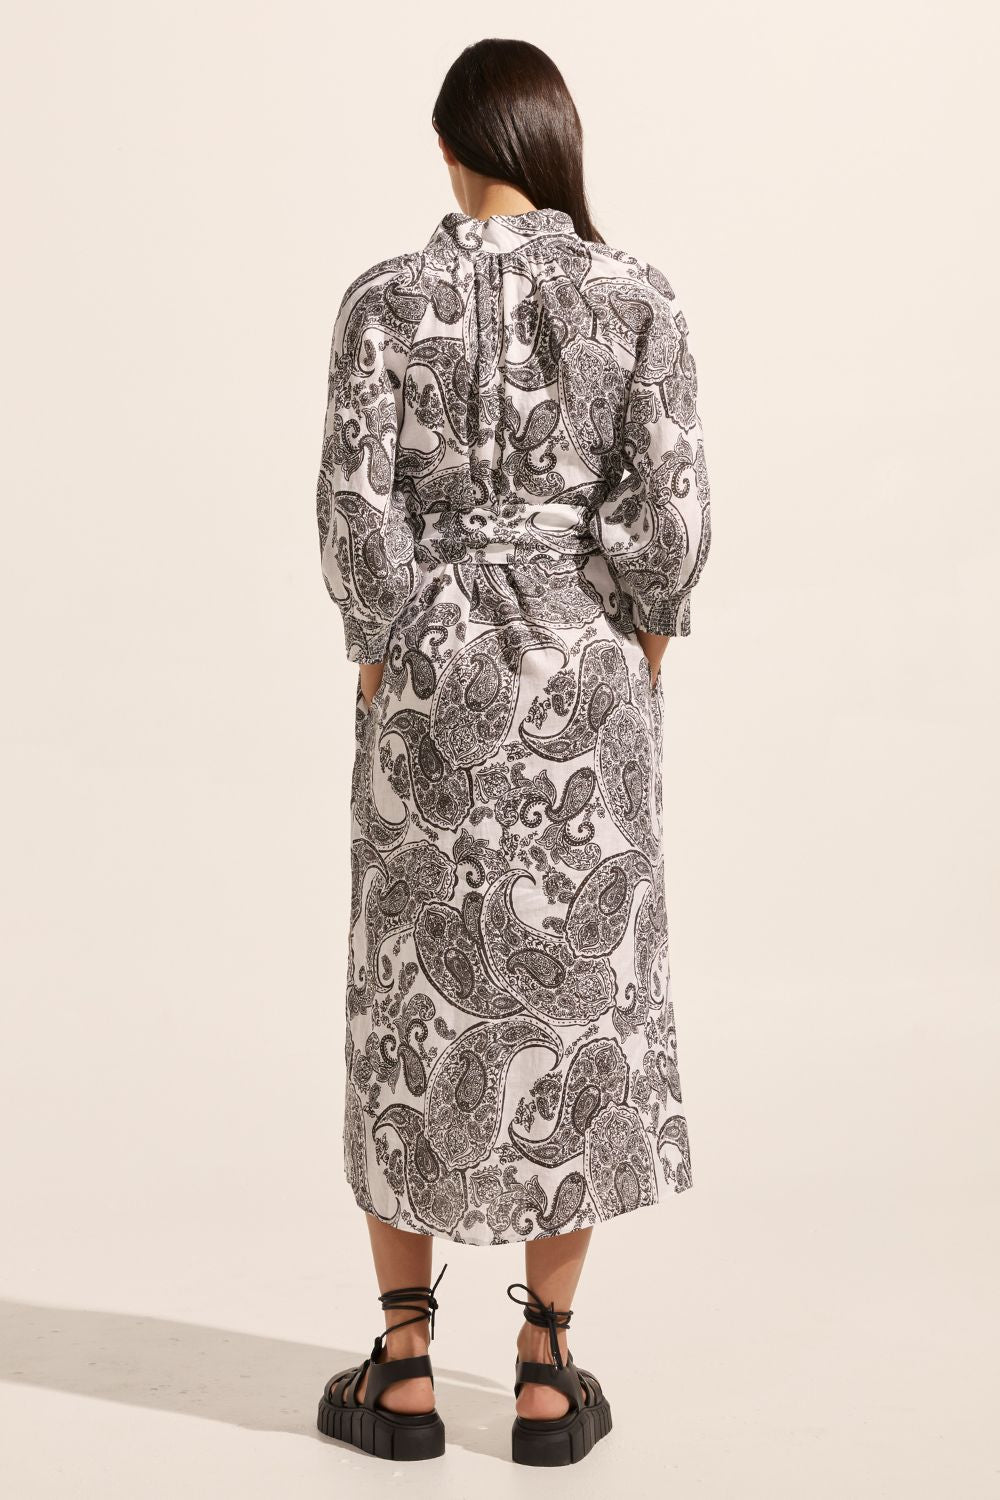 black and white print, self tie fabric belt, high neck, mid length sleeve, midi dress, side pockets, back view